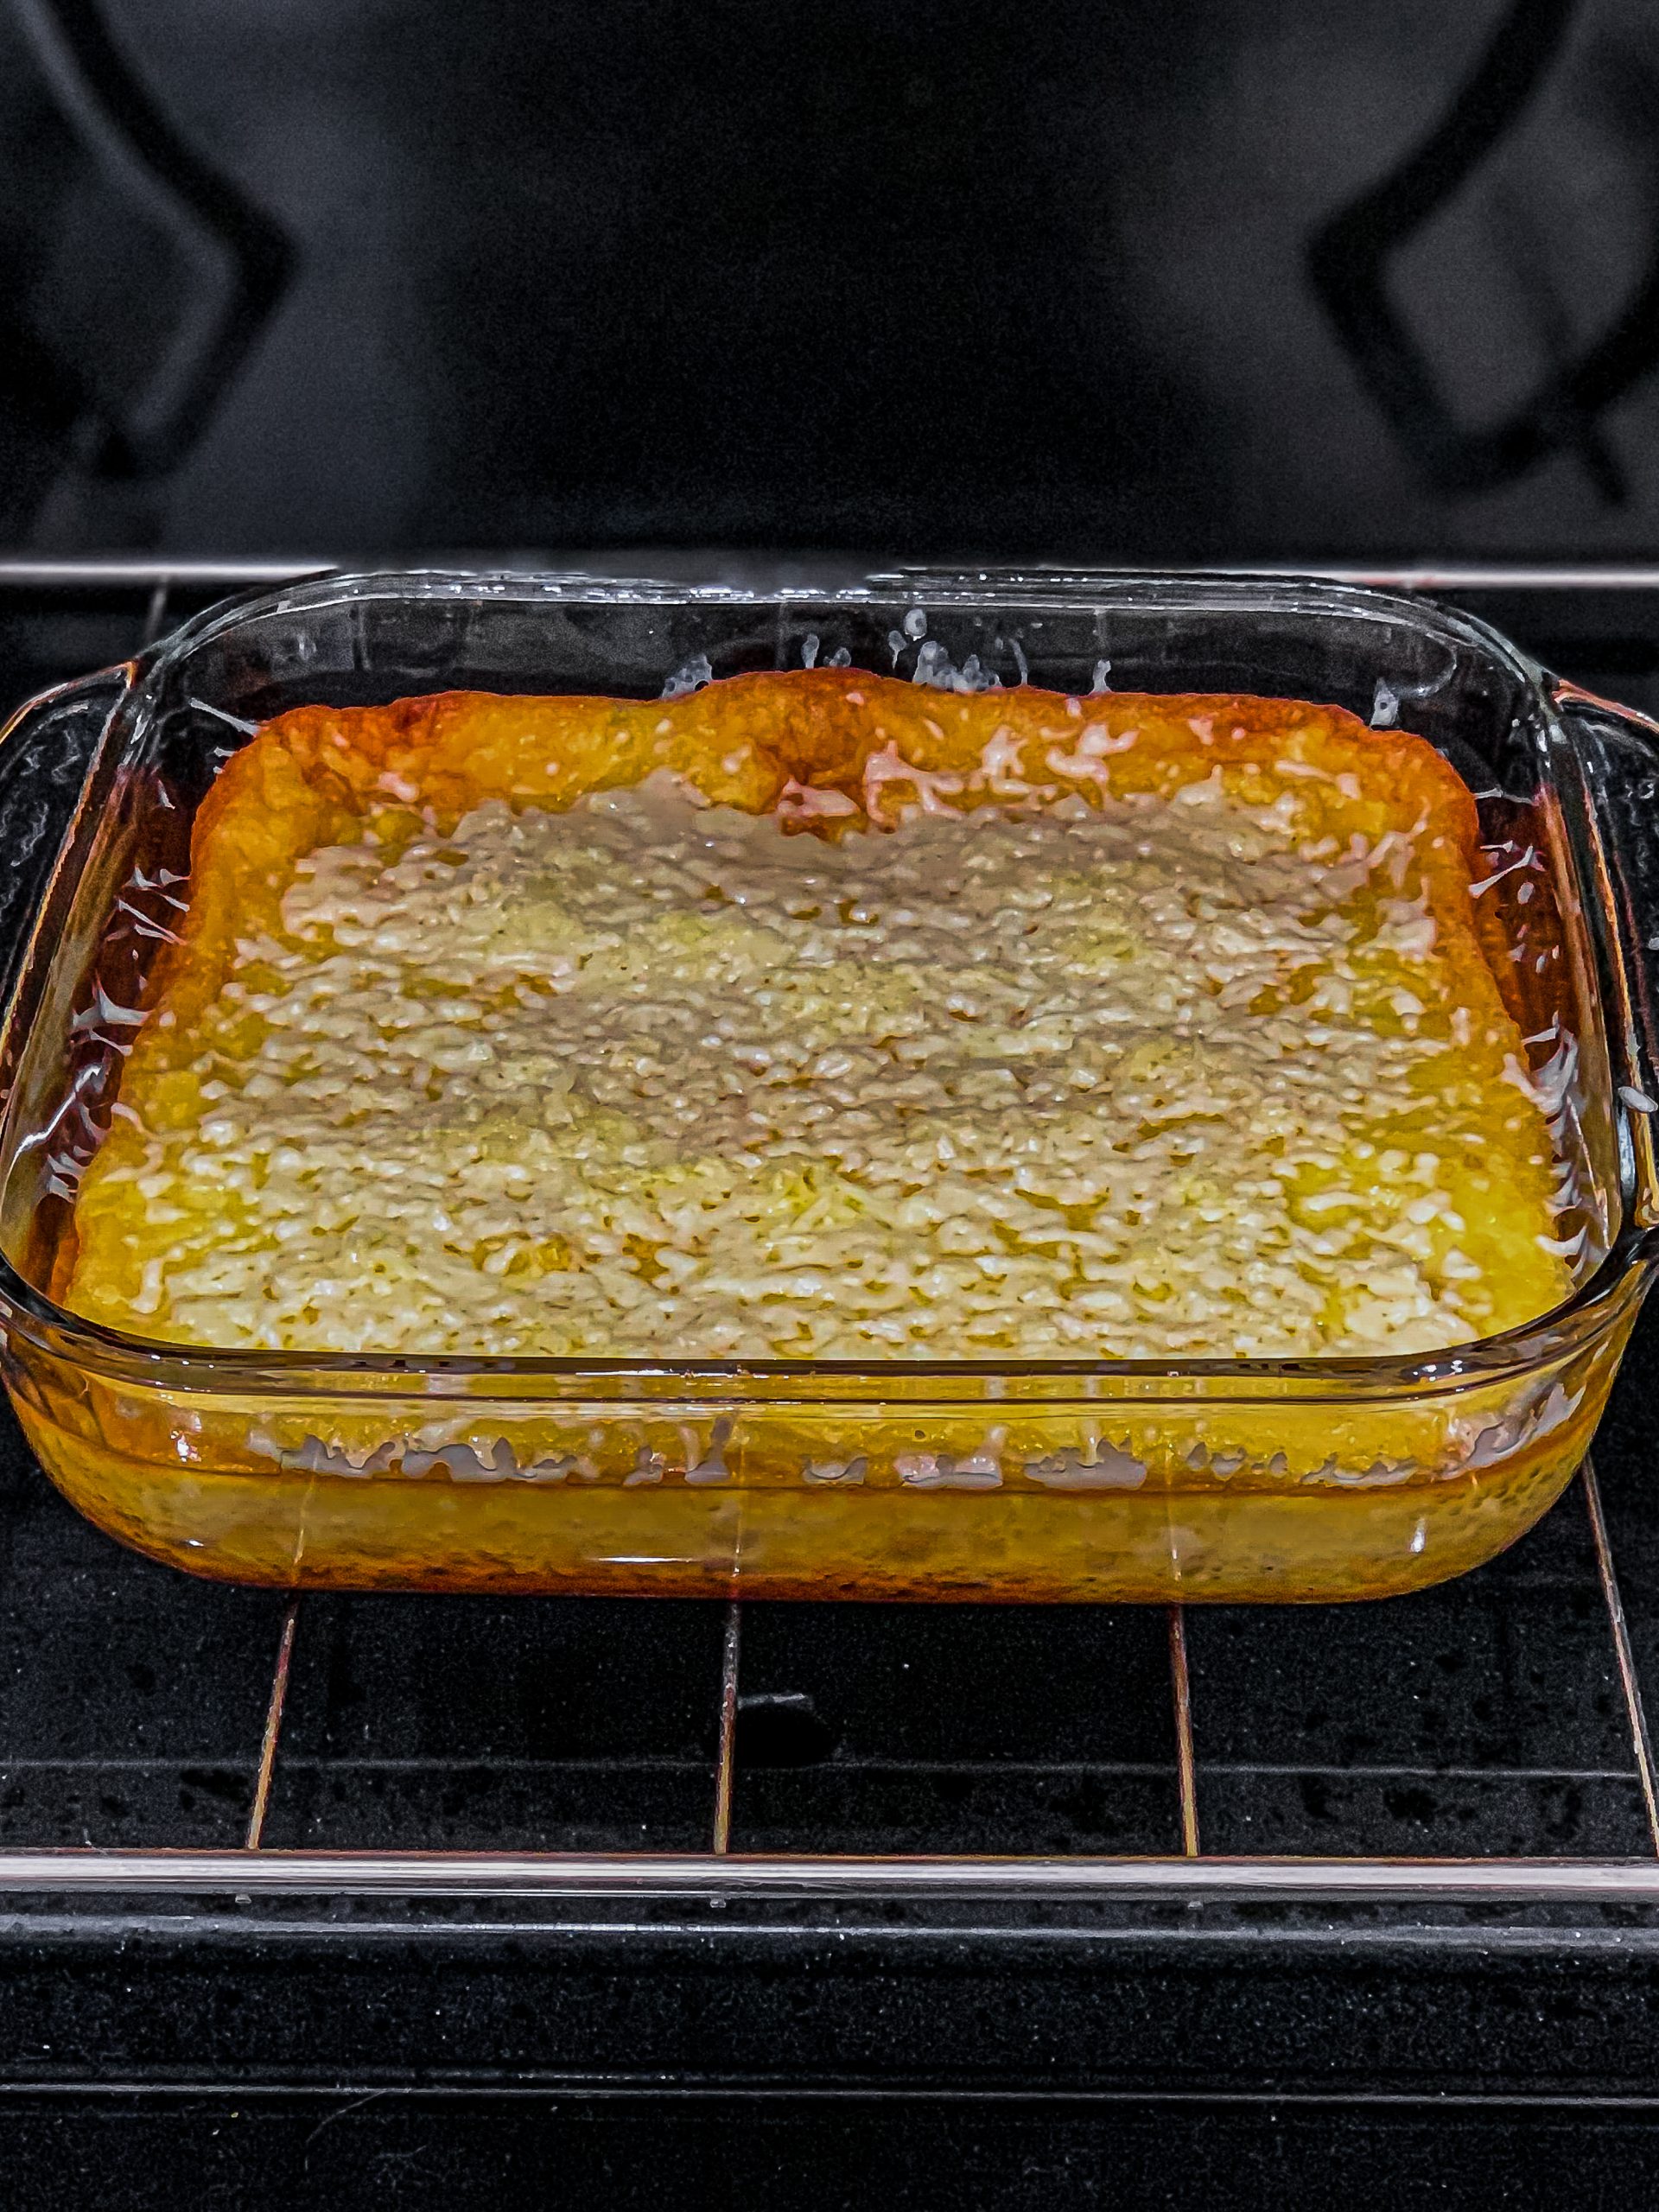 Add the shredded cheese on the top and leave it another 5 minutes for the cheese to melt.